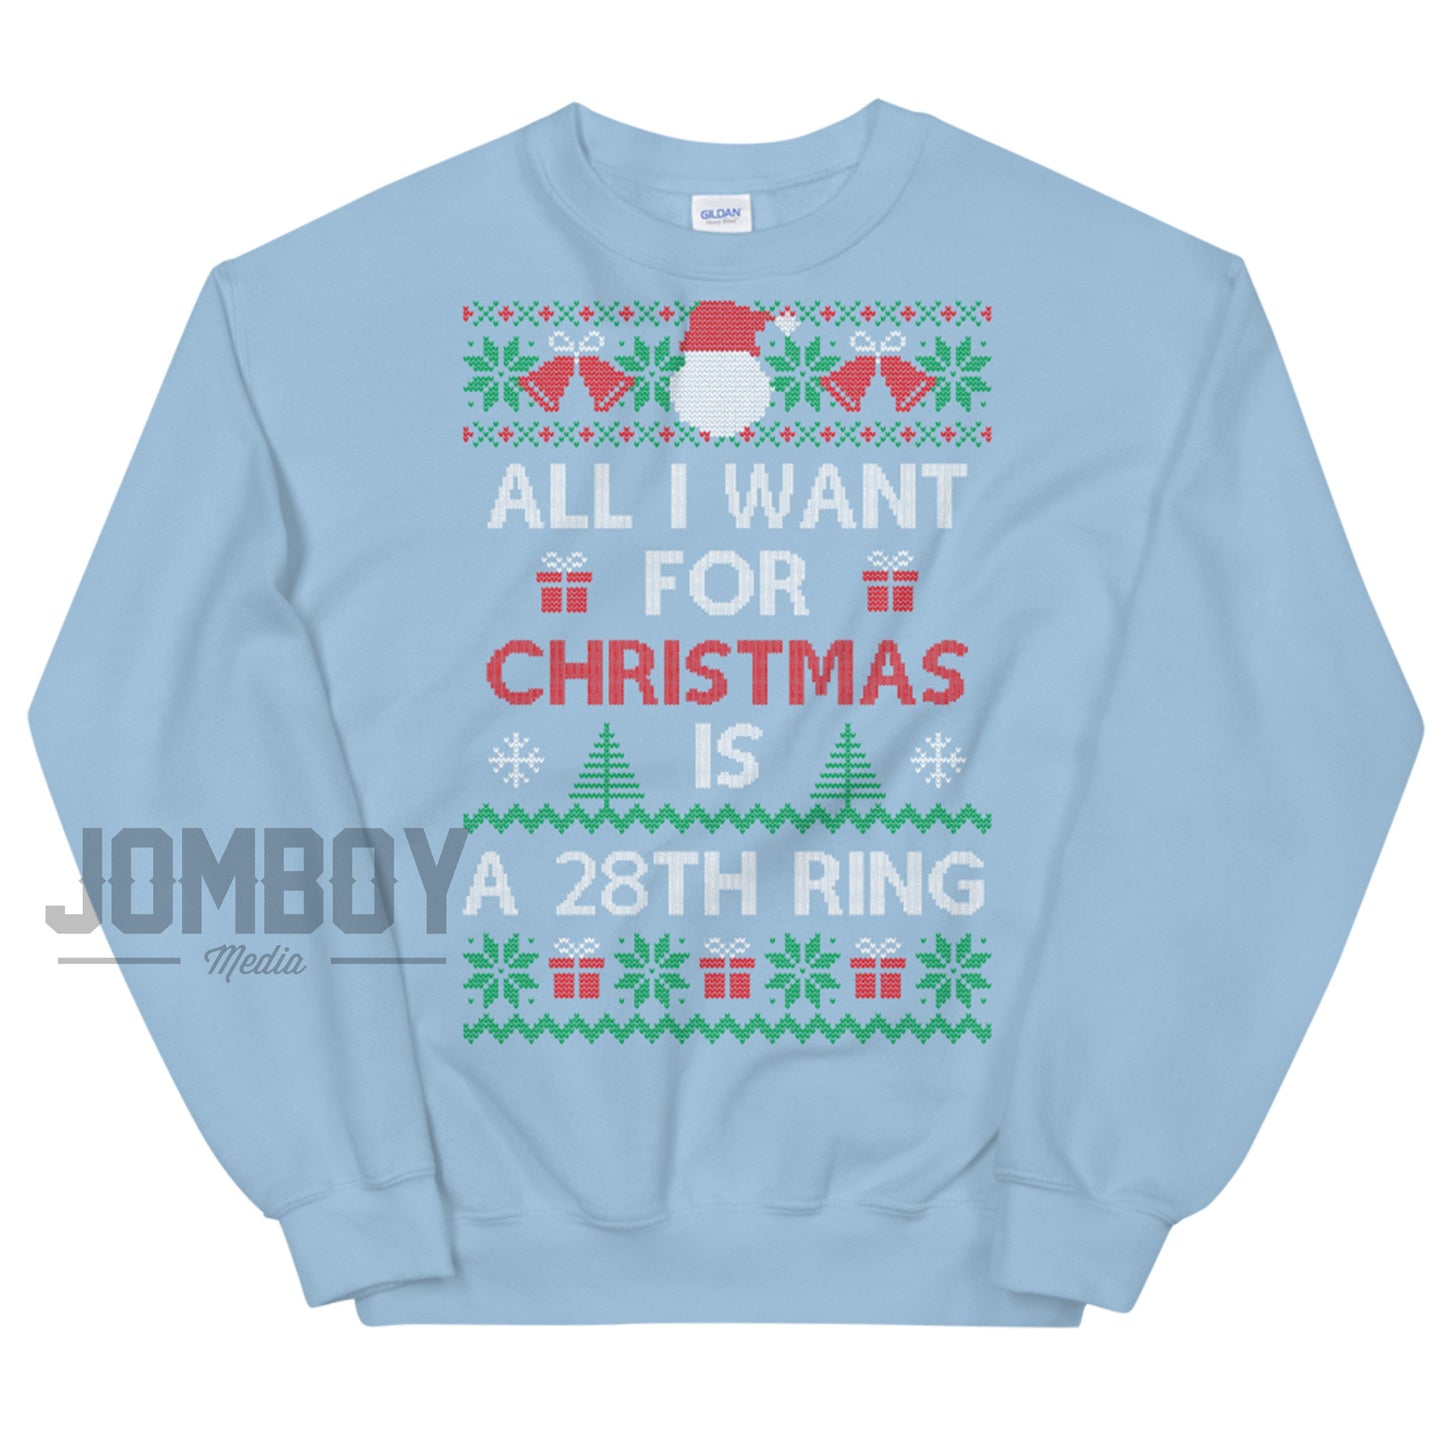 All I Want For Christmas Is A 28th Ring | Holiday Sweater - Jomboy Media